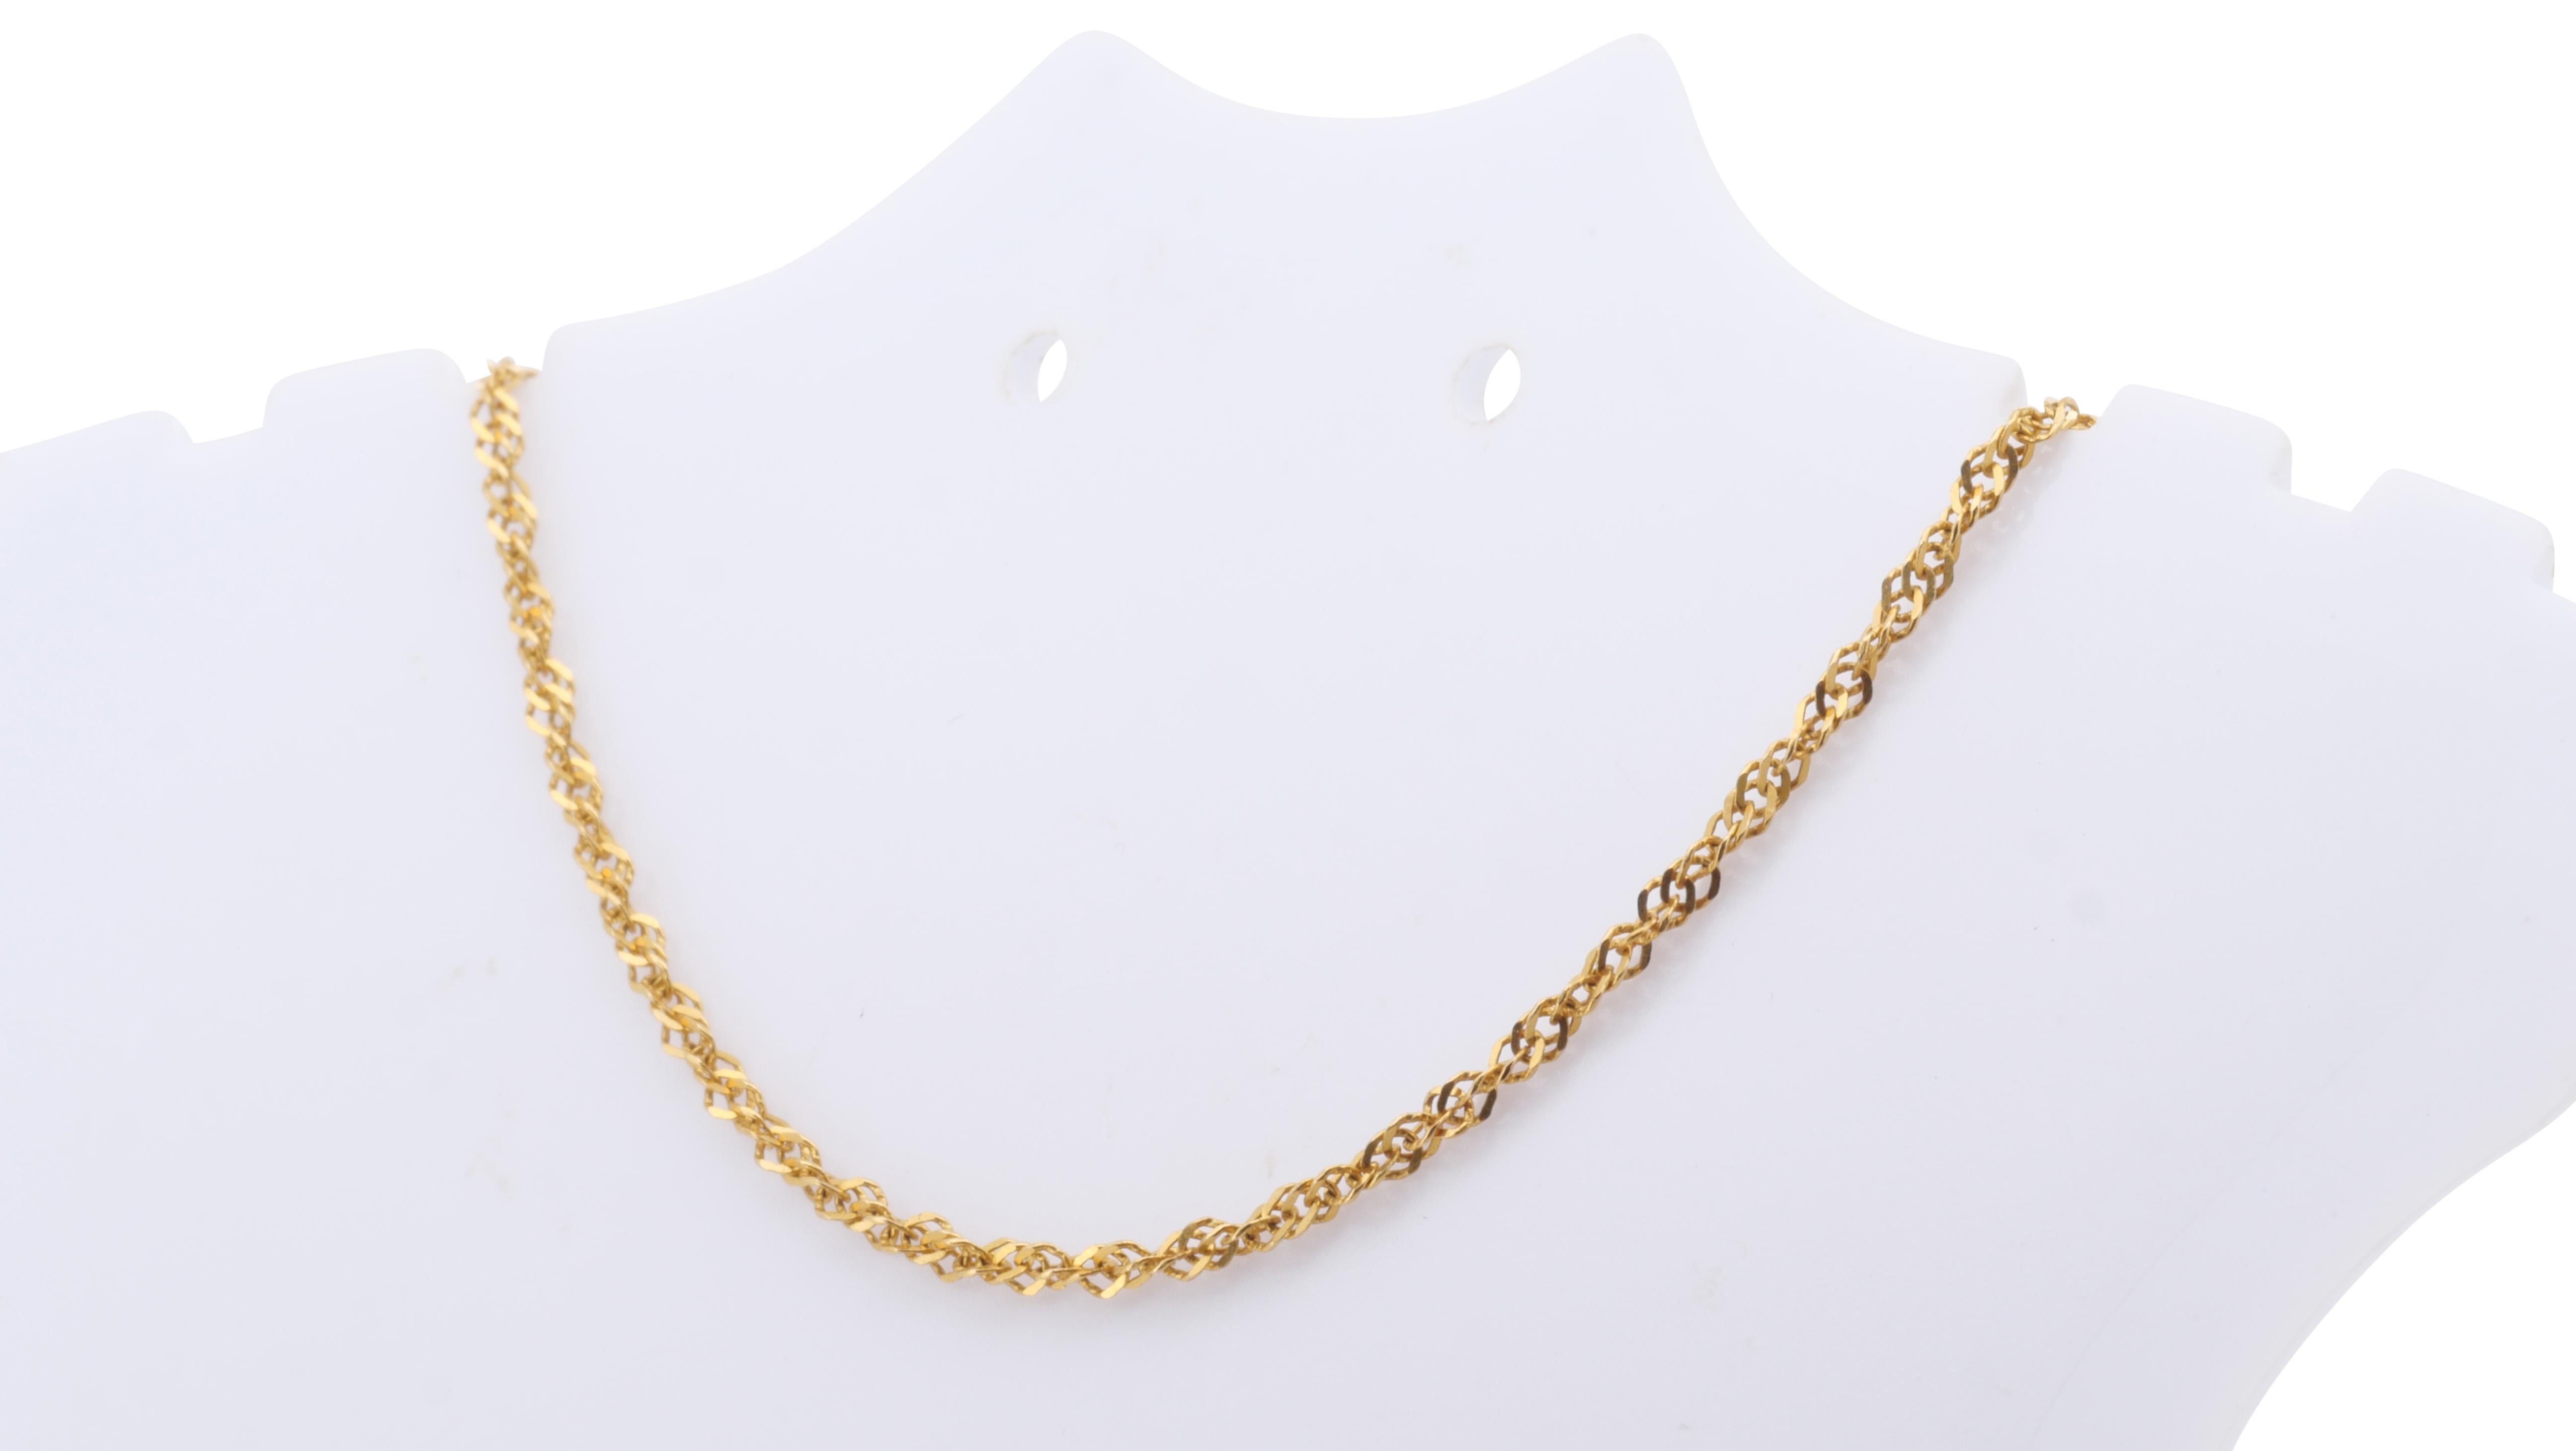 A beautiful chain made of 14K Yellow Gold with a high quality polish. It comes with a nice jewelry box.

sku: C-SN-YG-186797

jewelry weight: 1.71
size: L-40cm T-1.5mm

If you have any questions, please don't hesitate to reach out to us.
It's